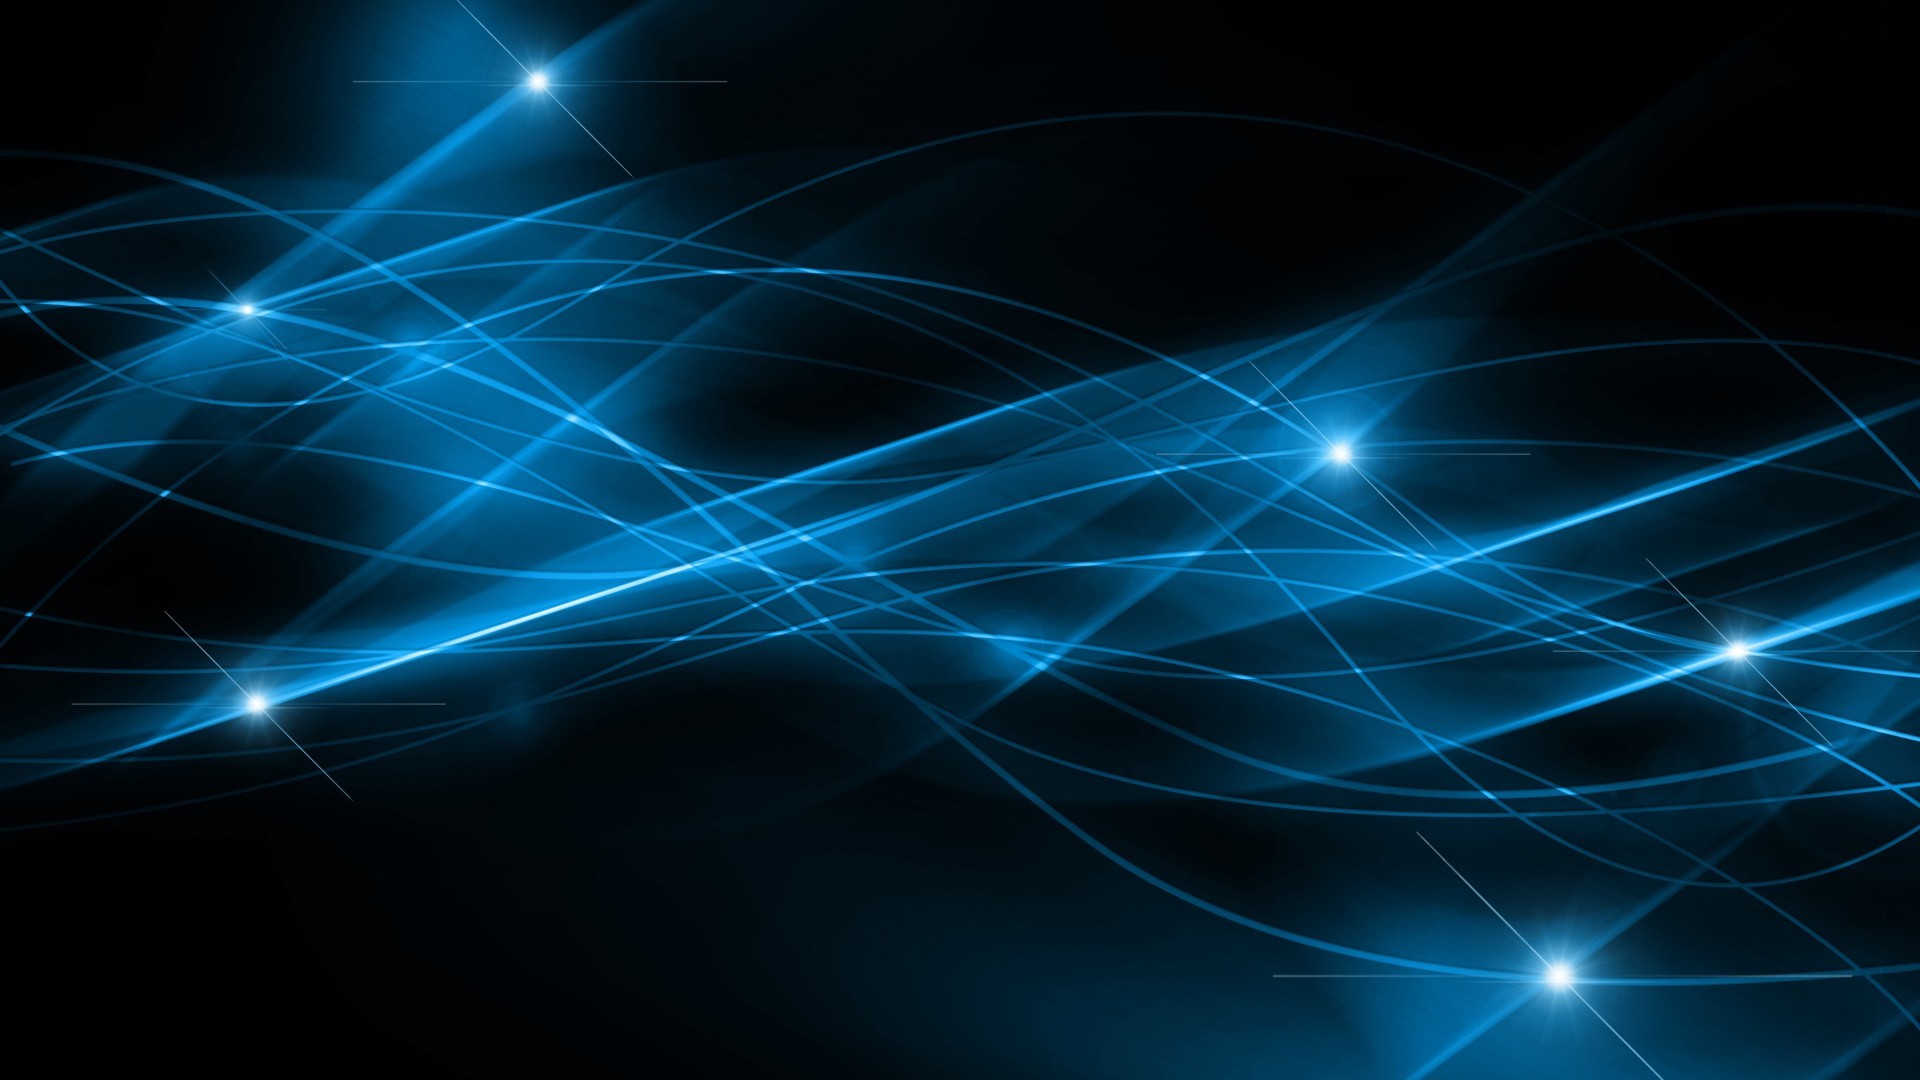 1920x1080 Black and blue abstract wallpaper background.